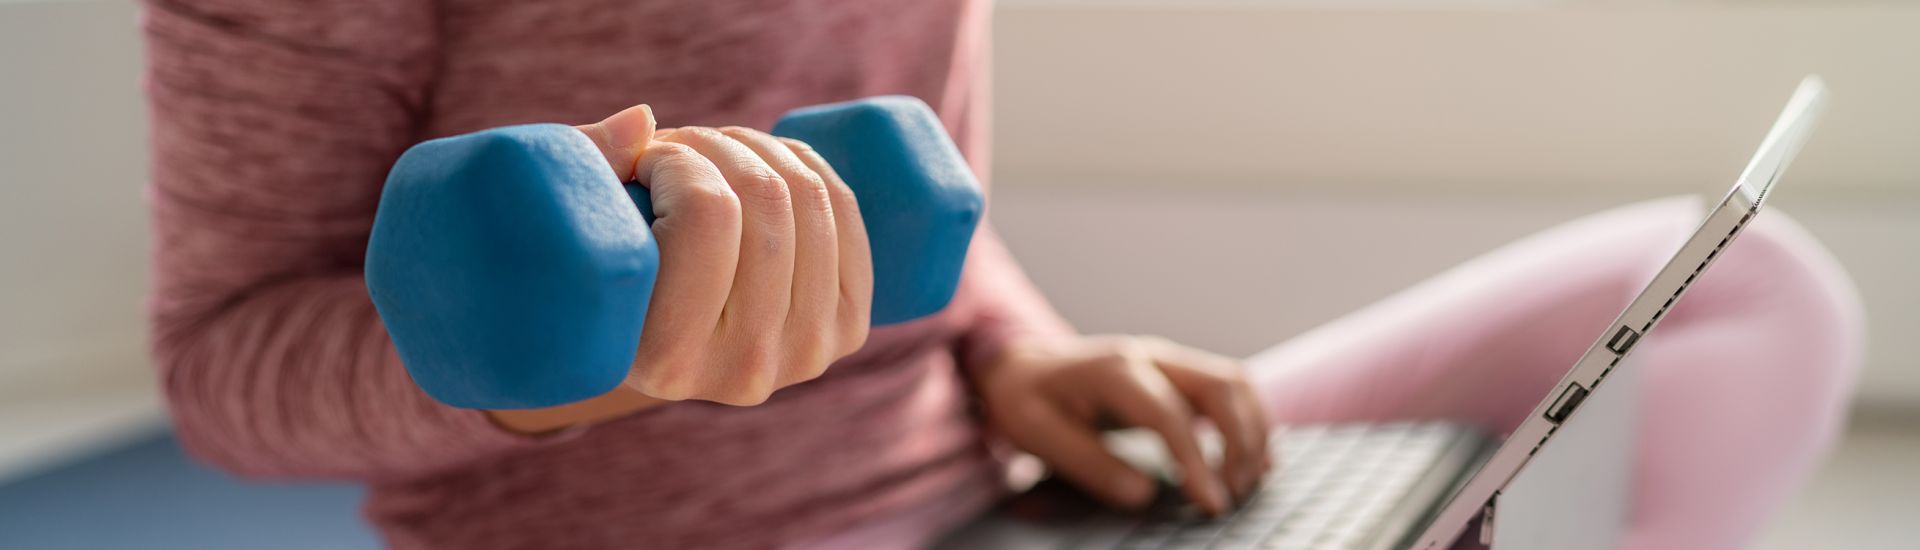 Close-up of hand holding a dumbell weight and the other hand on a laptop